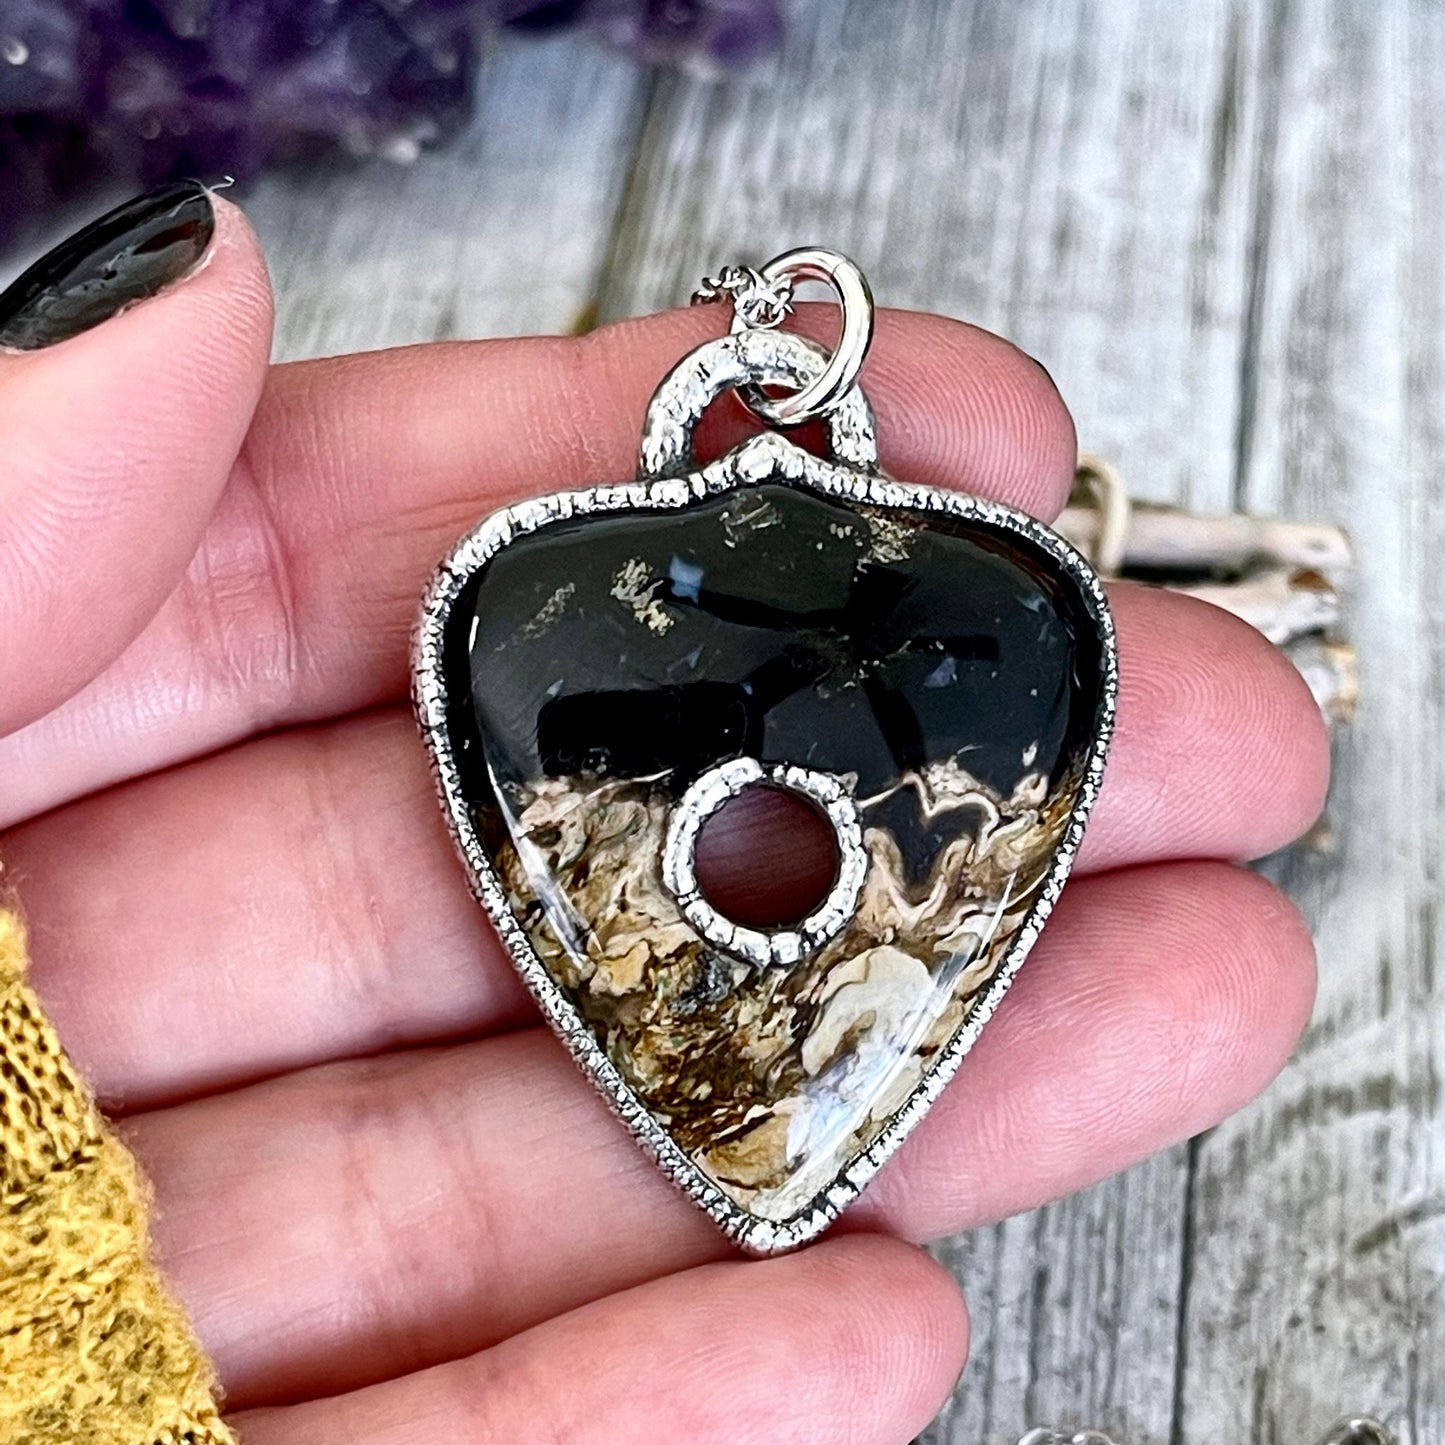 Bohemian Fashion, Bohemian Jewelry, Crystal Jewelry, Crystal Necklace, Crystal Necklaces, Crystal pendant, Etsy ID: 1319012057, Fossilized Palm Root, FOXLARK- NECKLACES, Goth Jewelry, Healing Crystal, Jewelry, Jewelry For Woman, Necklaces, Ouija Planchett